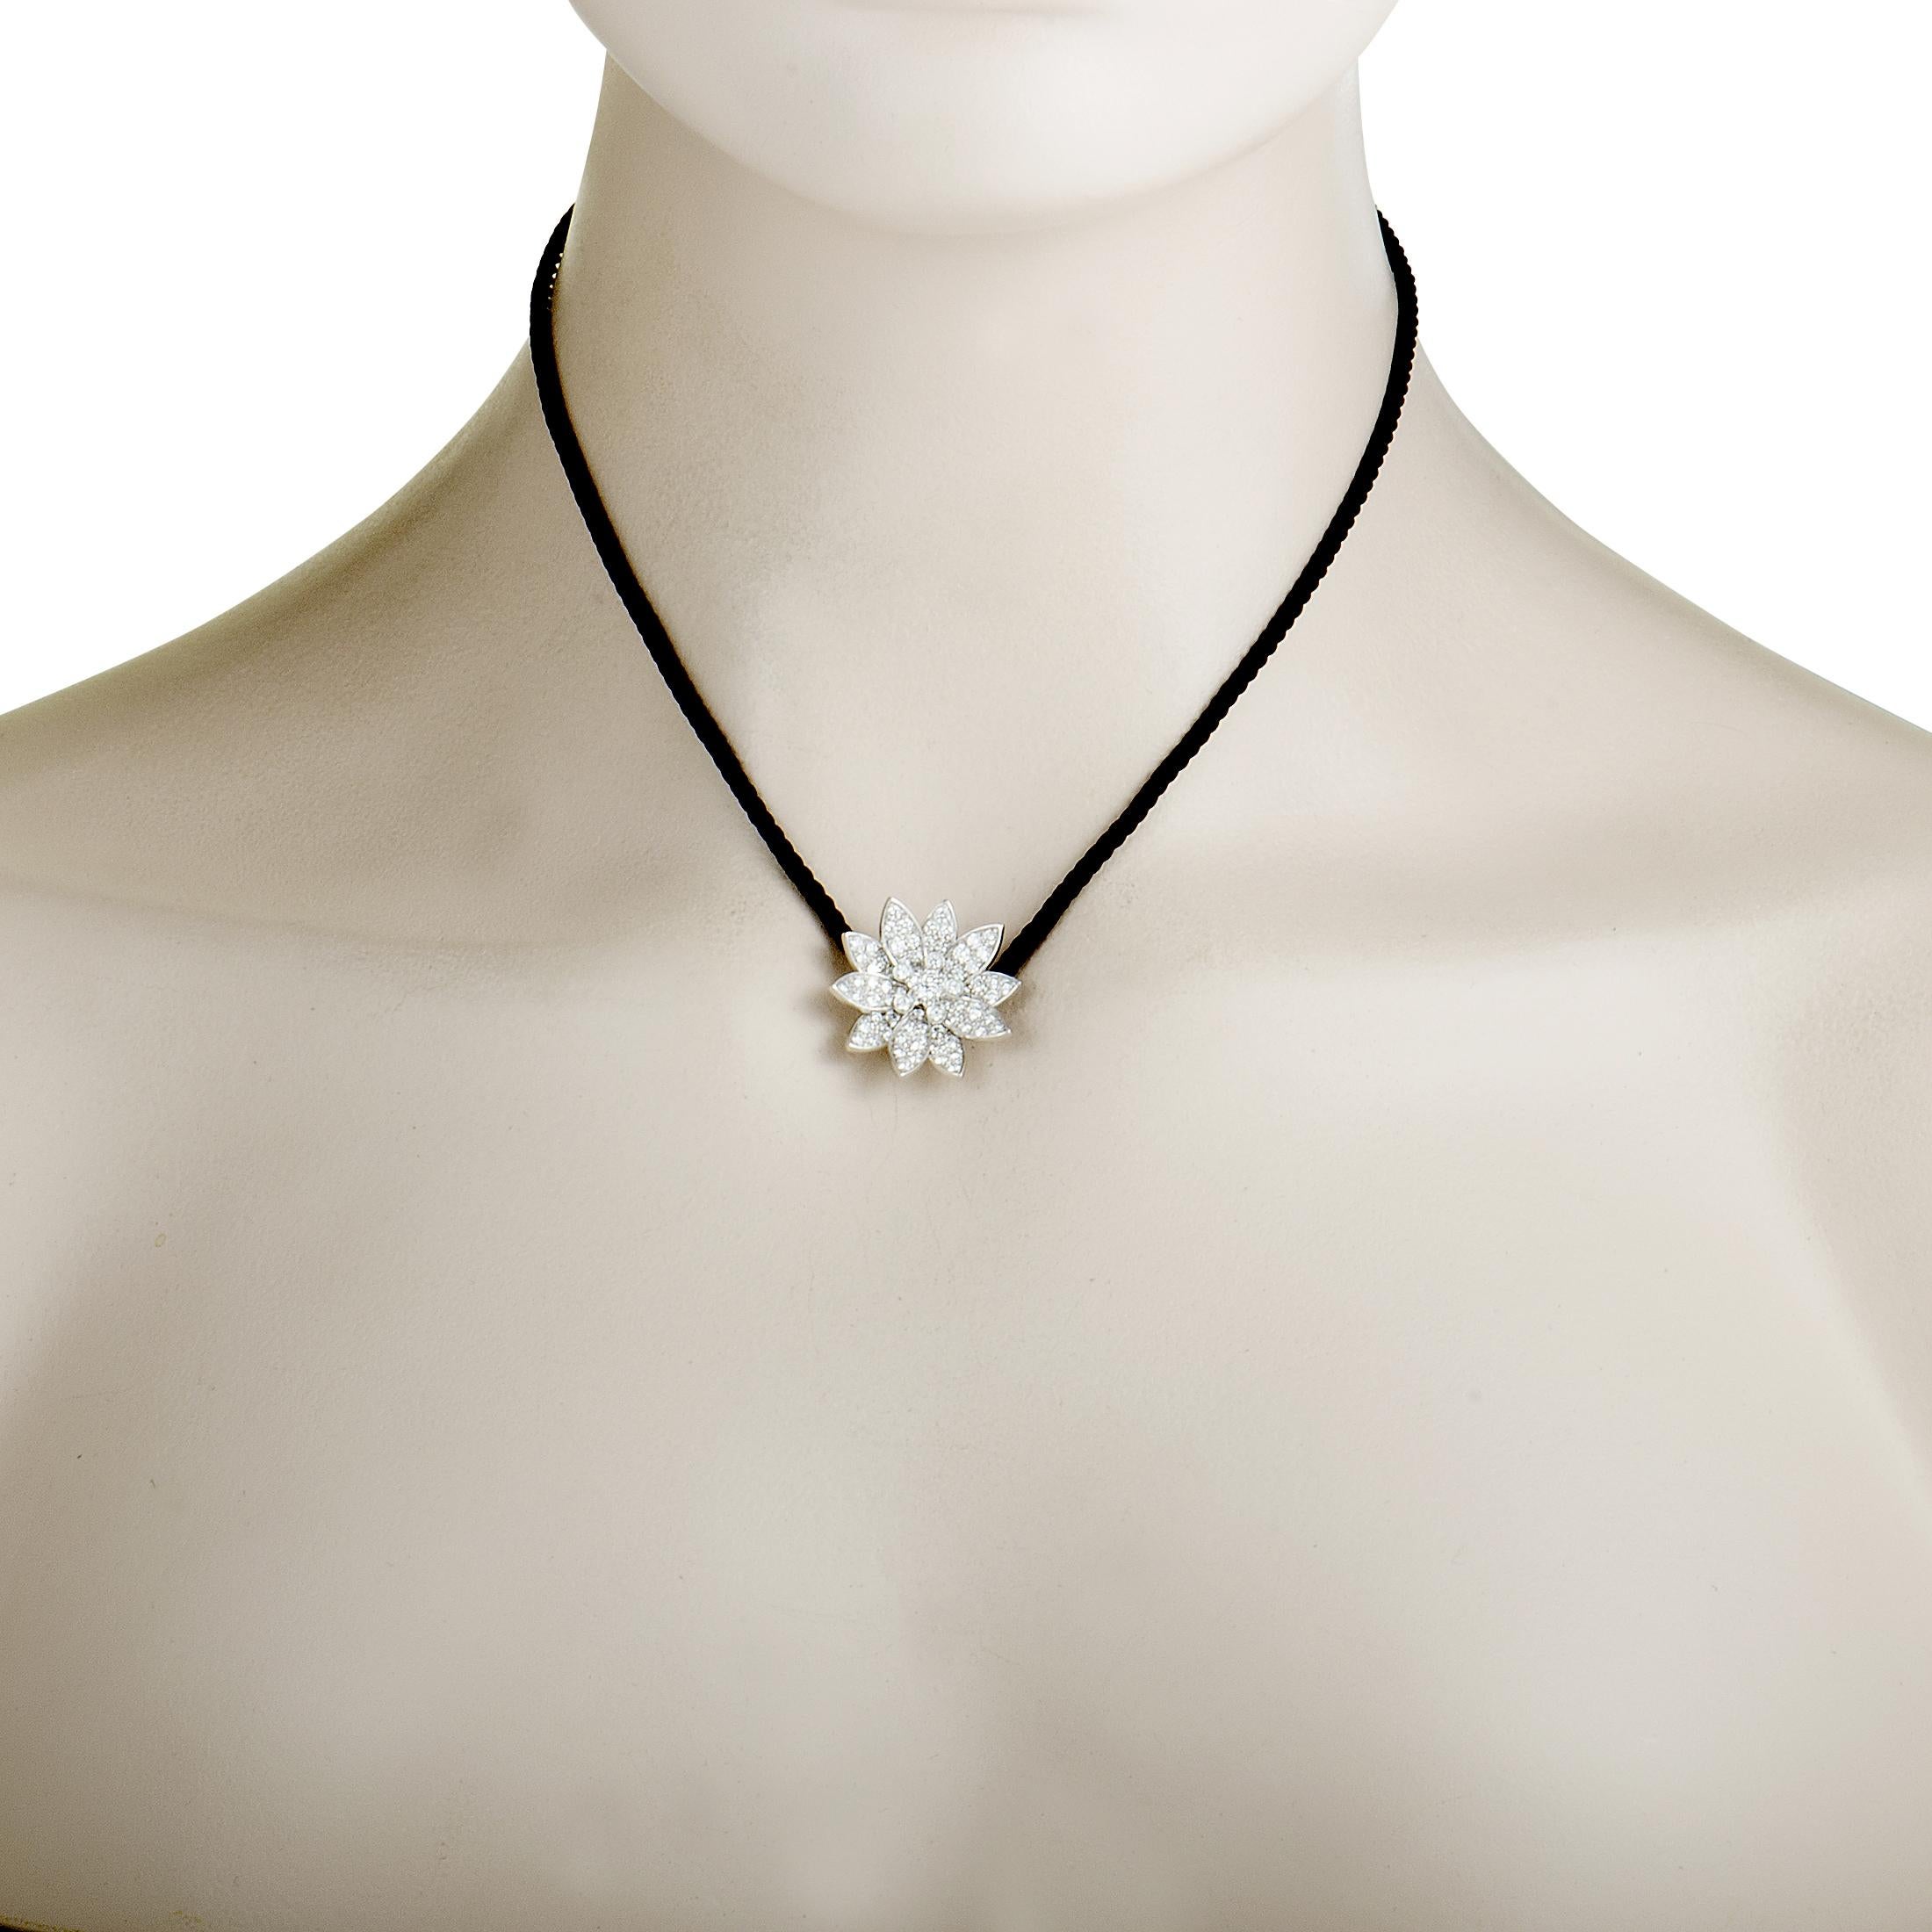 This extraordinarily envisioned Van Cleef & Arpels necklace from the exceptional “Lotus” collection is presented with an attractive black cord onto which a stunningly extravagant lotus pendant is attached. The pendant is crafted from 18K white gold